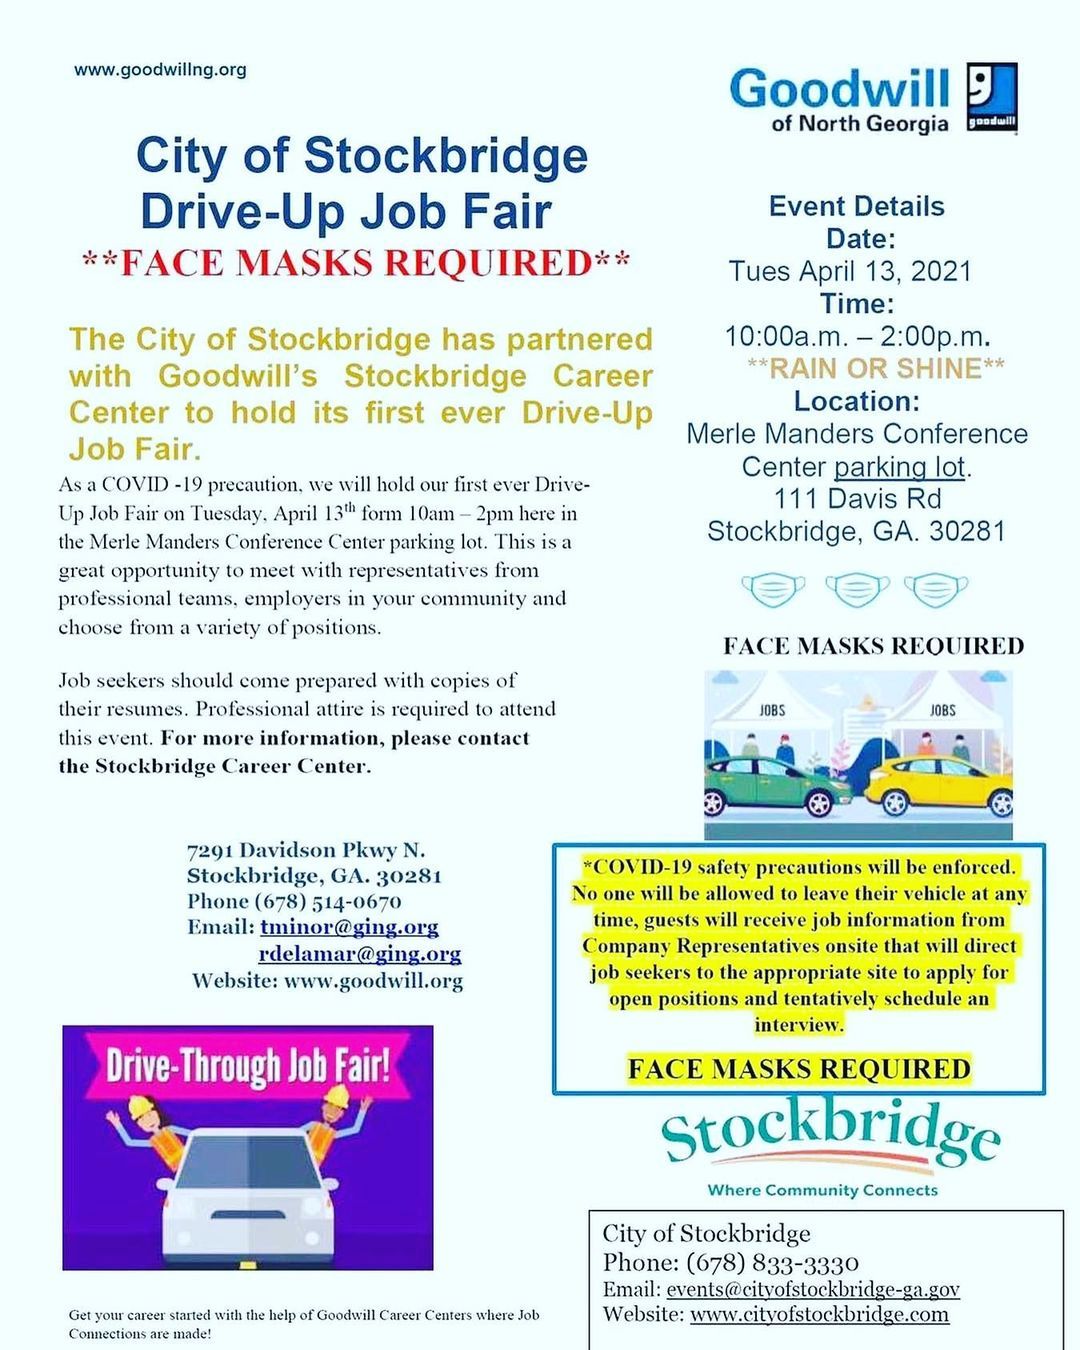 Jobs……Jobs……Jobs!
Bringing jobs to Stockbridge and Henry County started with 500 people showing up in 2016 to the first Goodwill/Stockbridge job fair and this year we introduce a Drive Thru Covid safety job fair! It was my top priority to increase...